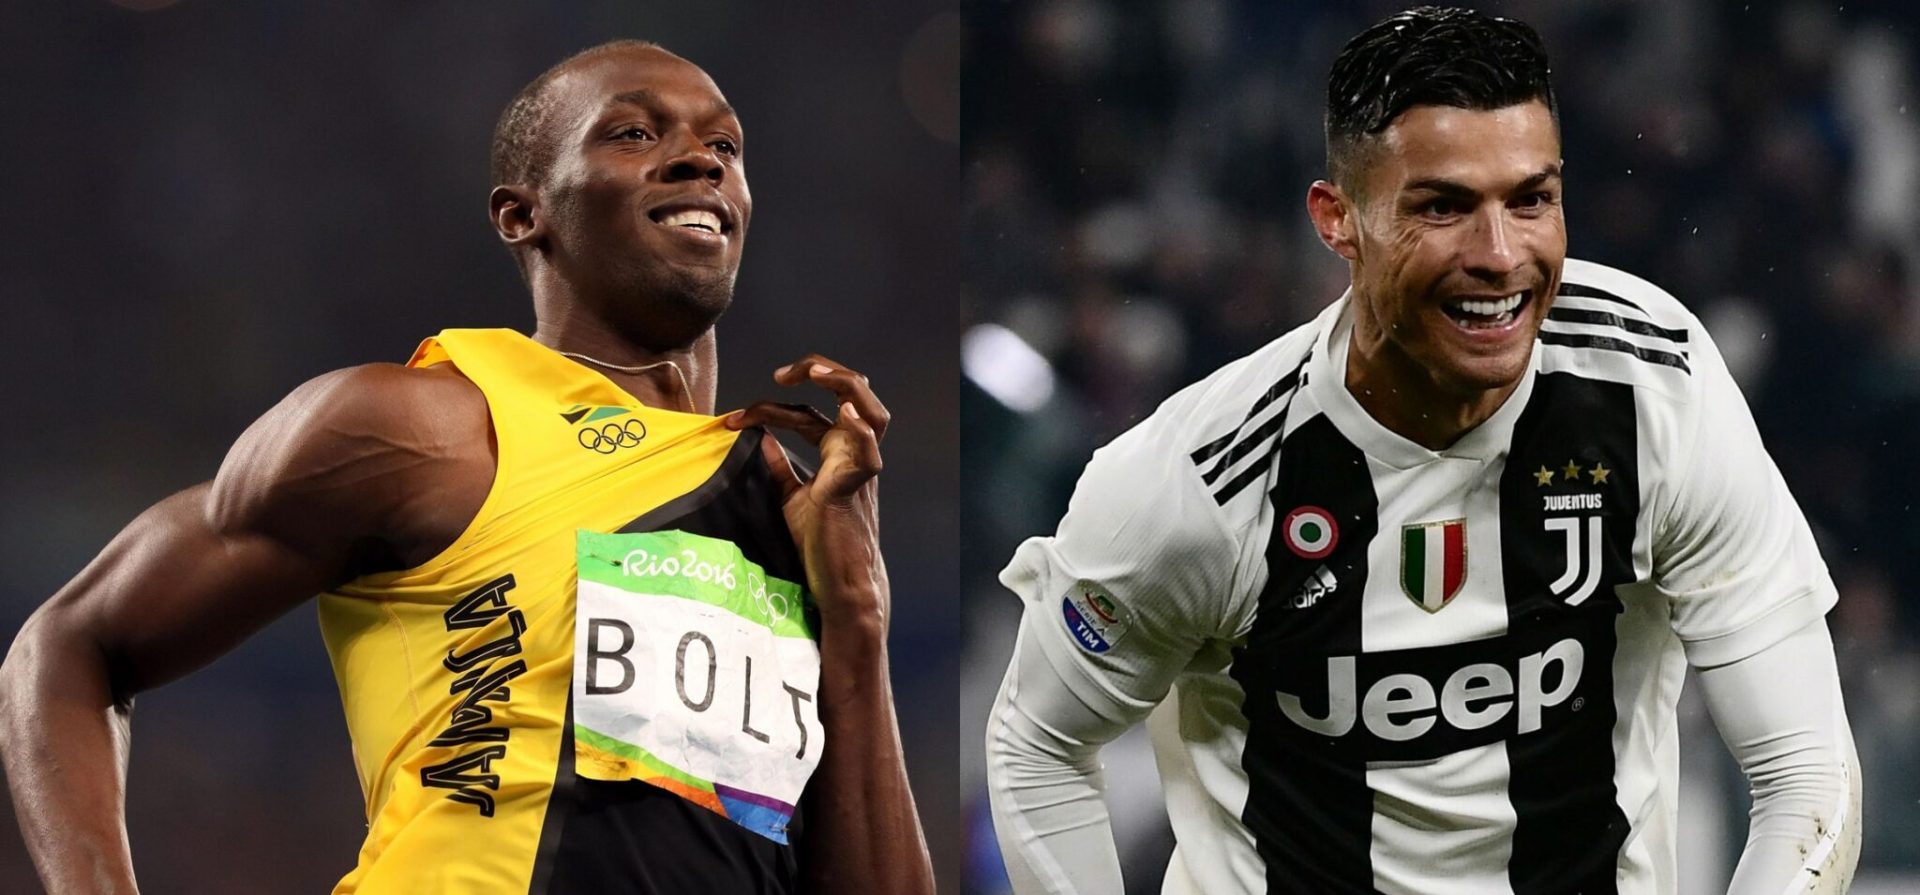 Usain Bolt: Ronaldo Is Faster Than Me Right Now